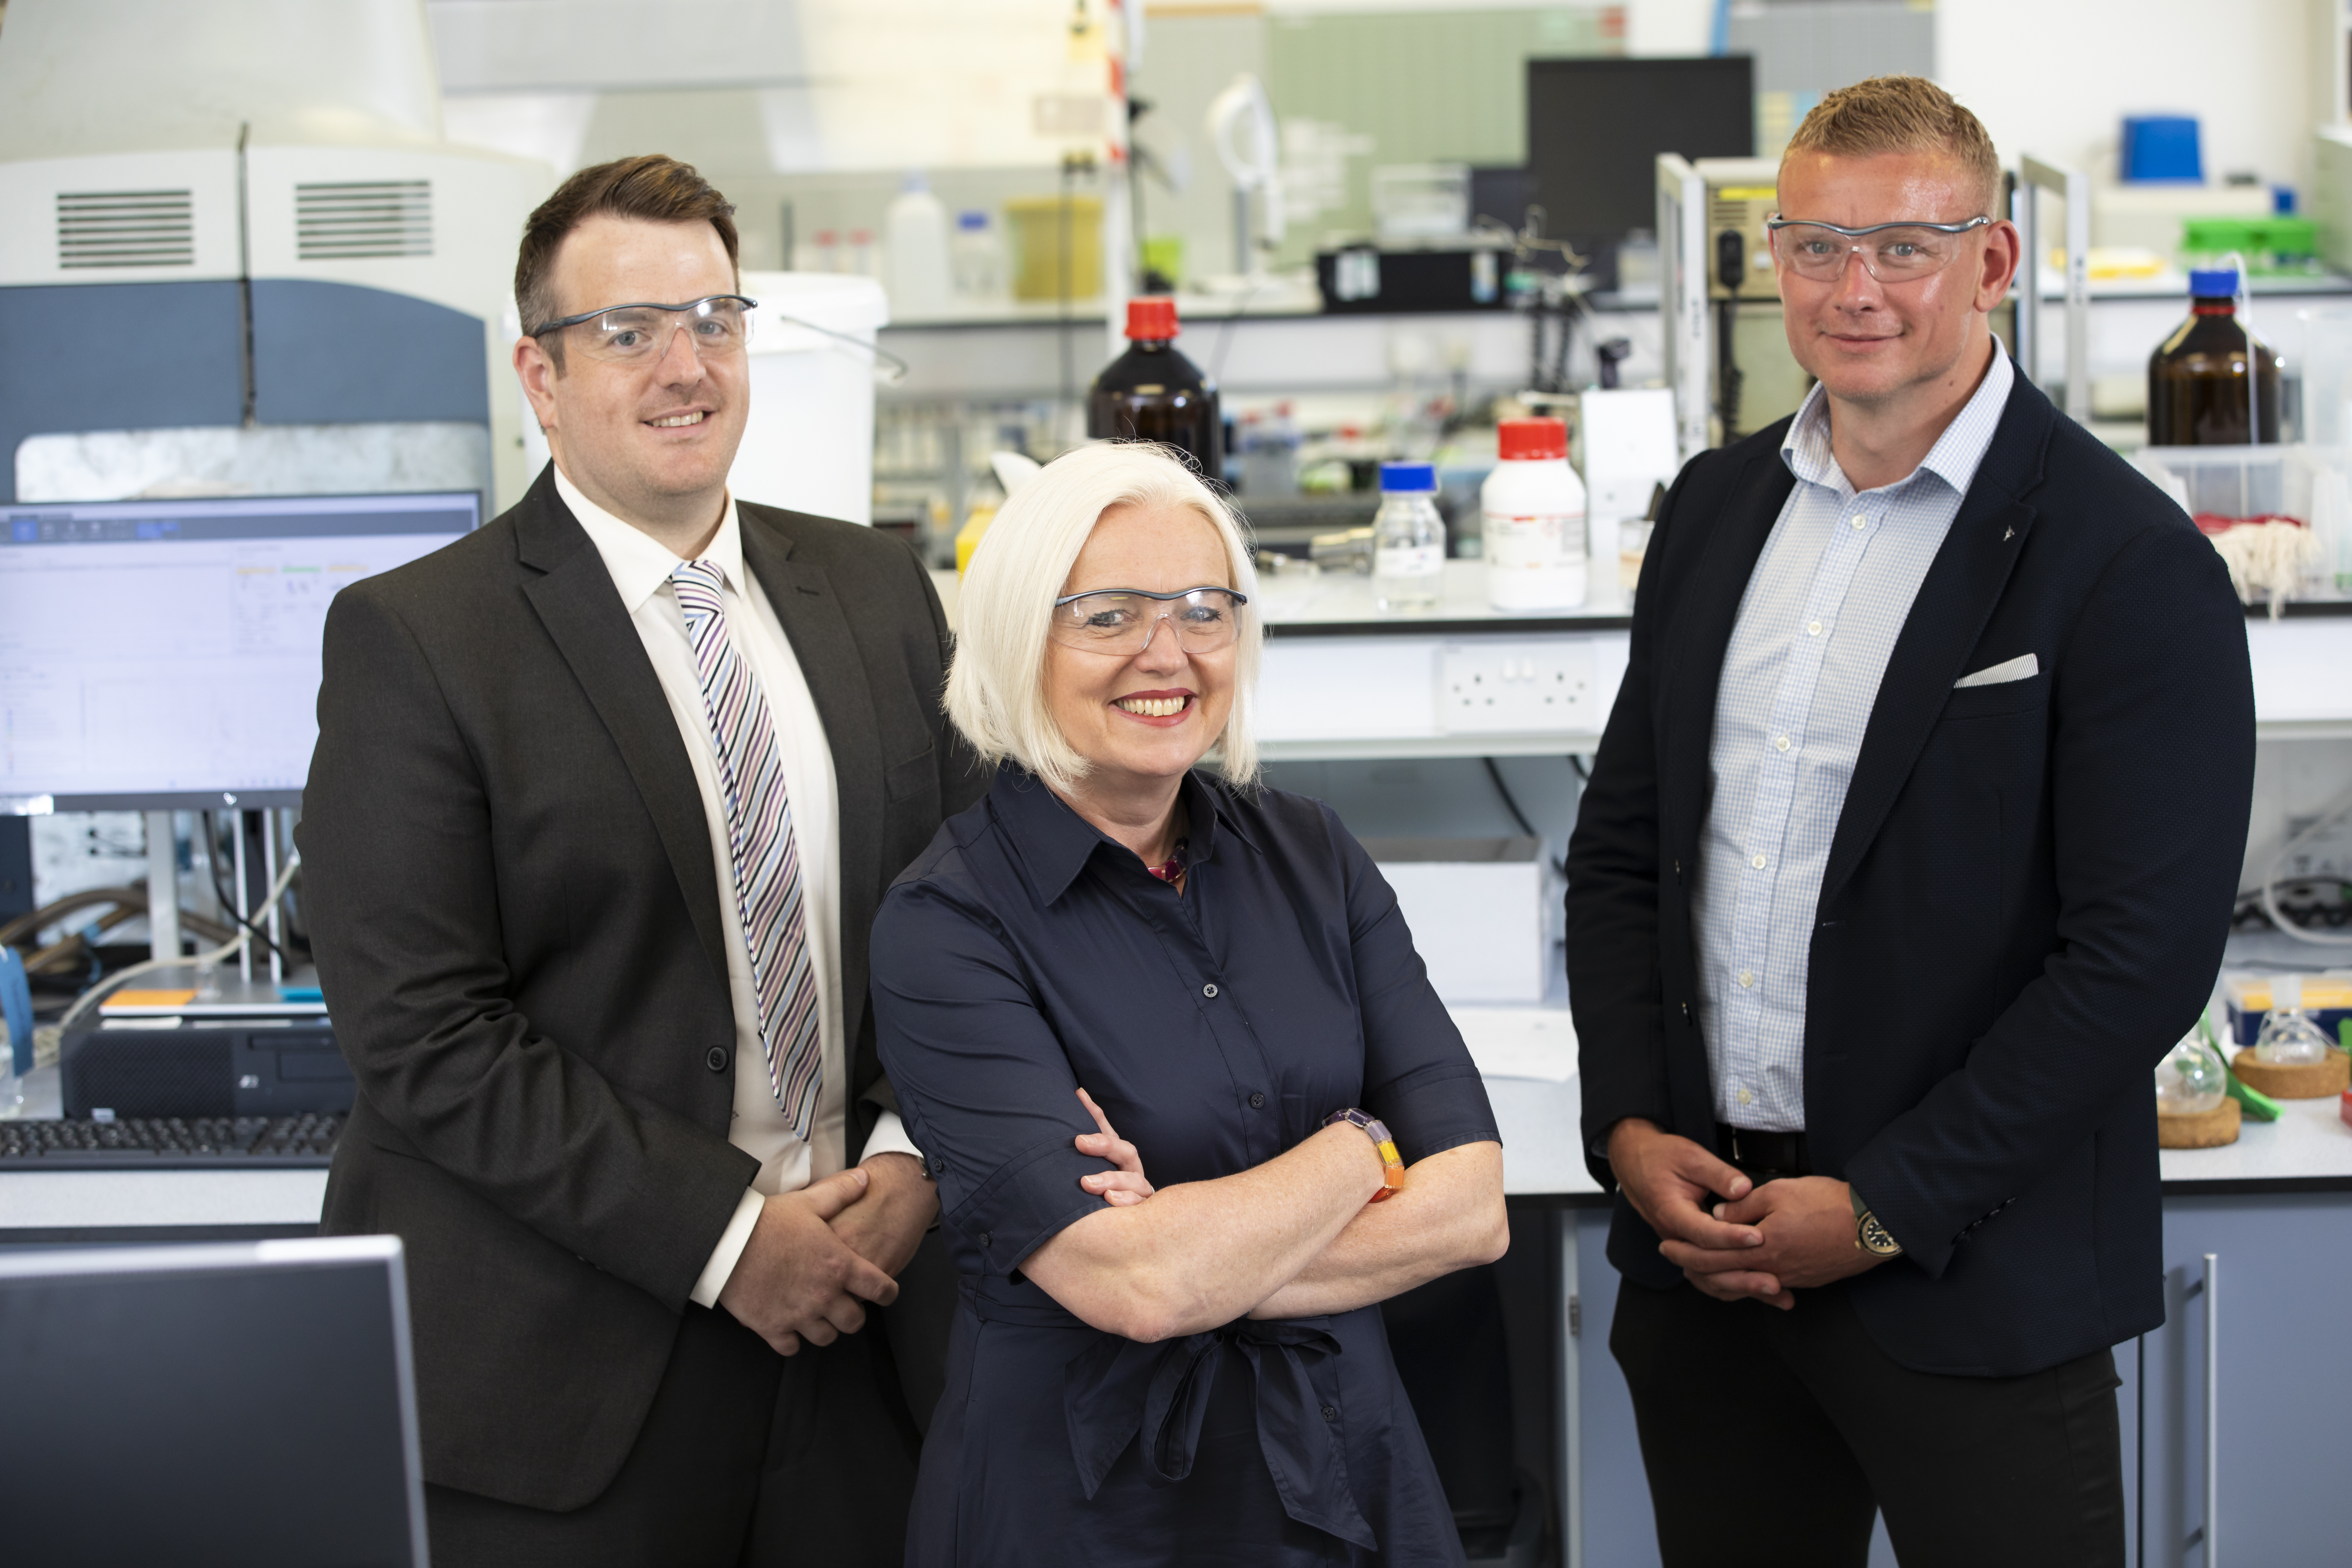 The Endeavour Partnership acts on the Sale of Cambridge Research Biochemicals to Biosynth